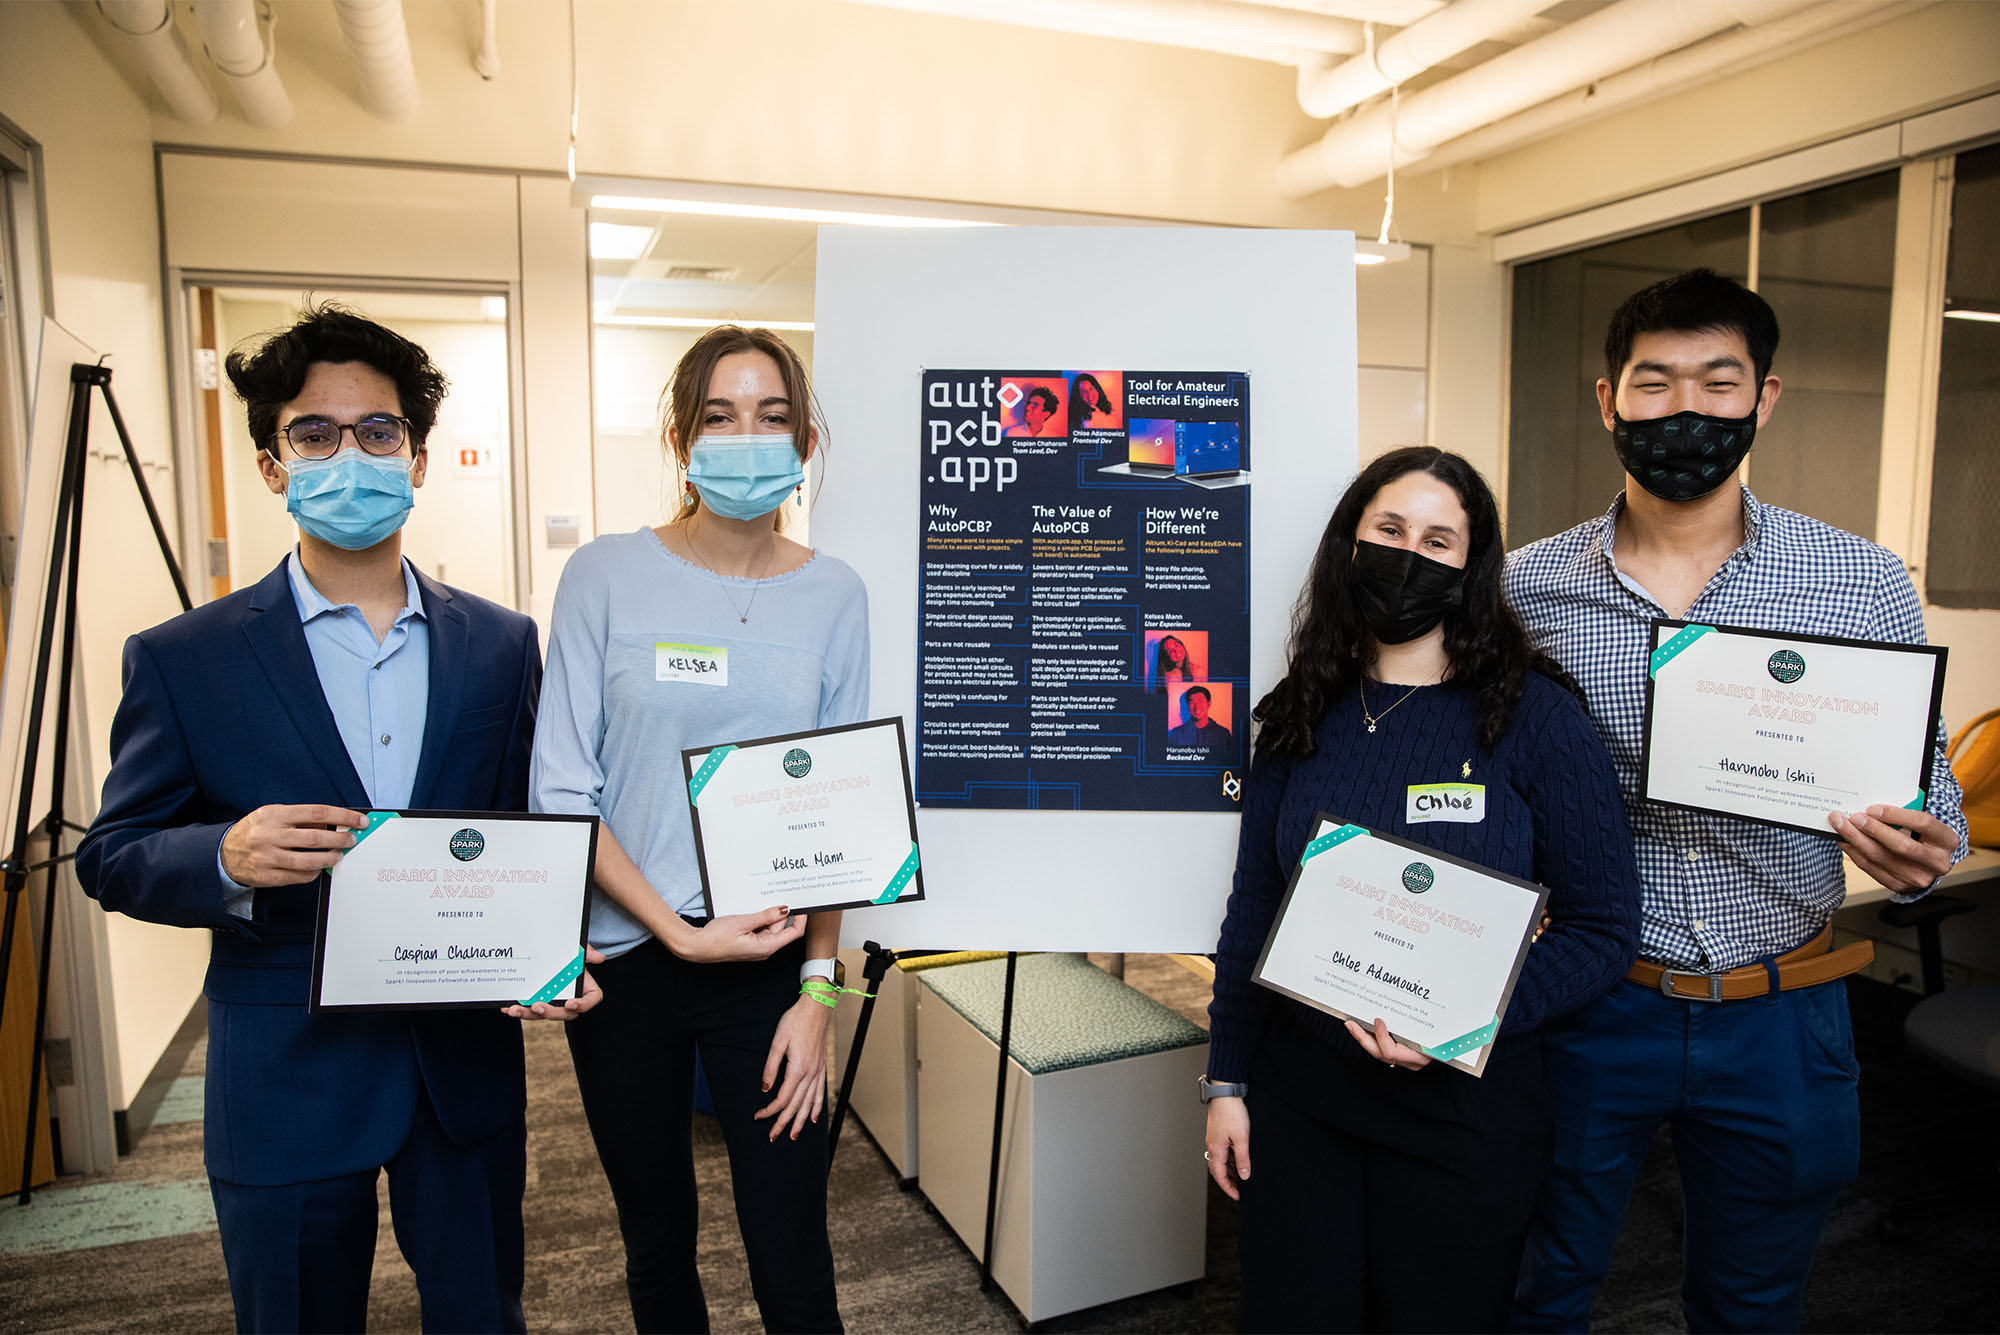 Caspian Chaharom (CAS’23) (left), Kelsea Mann (CFA’23), Chloe Adamowicz (CAS’22), and Harunobu Ishii (MET’22) pose for a photo after their autopcb app, which makes circuit design easily accessible, was awarded the Judges’ Choice Award for Innovation Fellows at the BU Spark! Fall 2021 Demo Day, December 10, 2021.